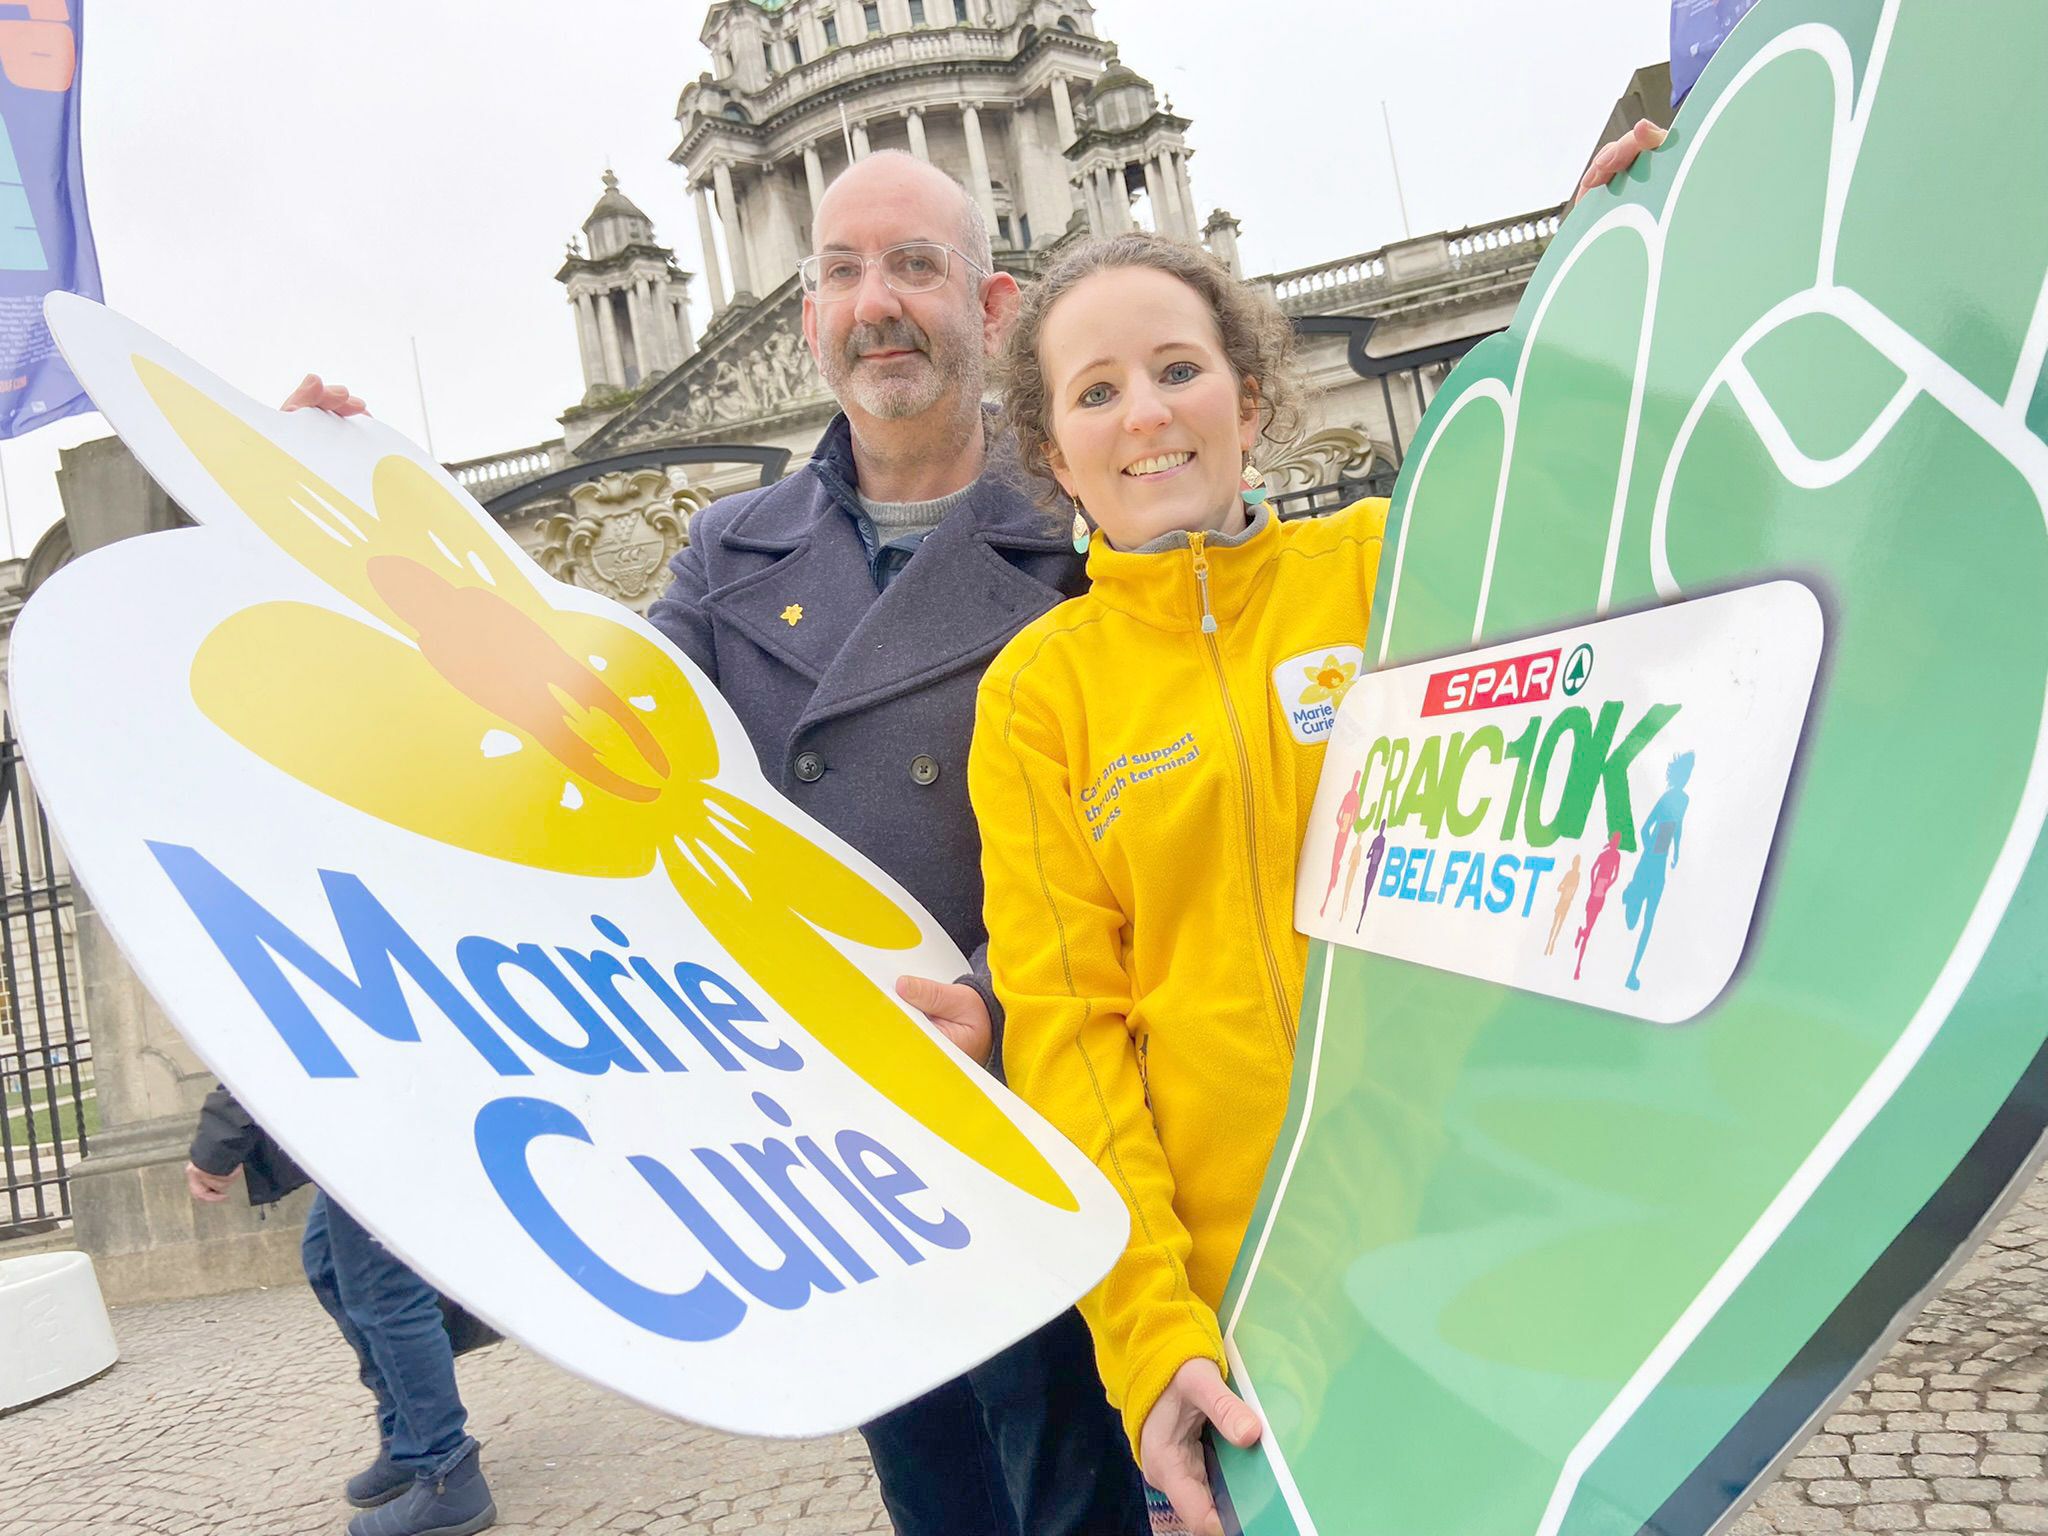 Emma Corey and Conor O’Kane frm Marie Curie get ready for the SPAR Craic 10k